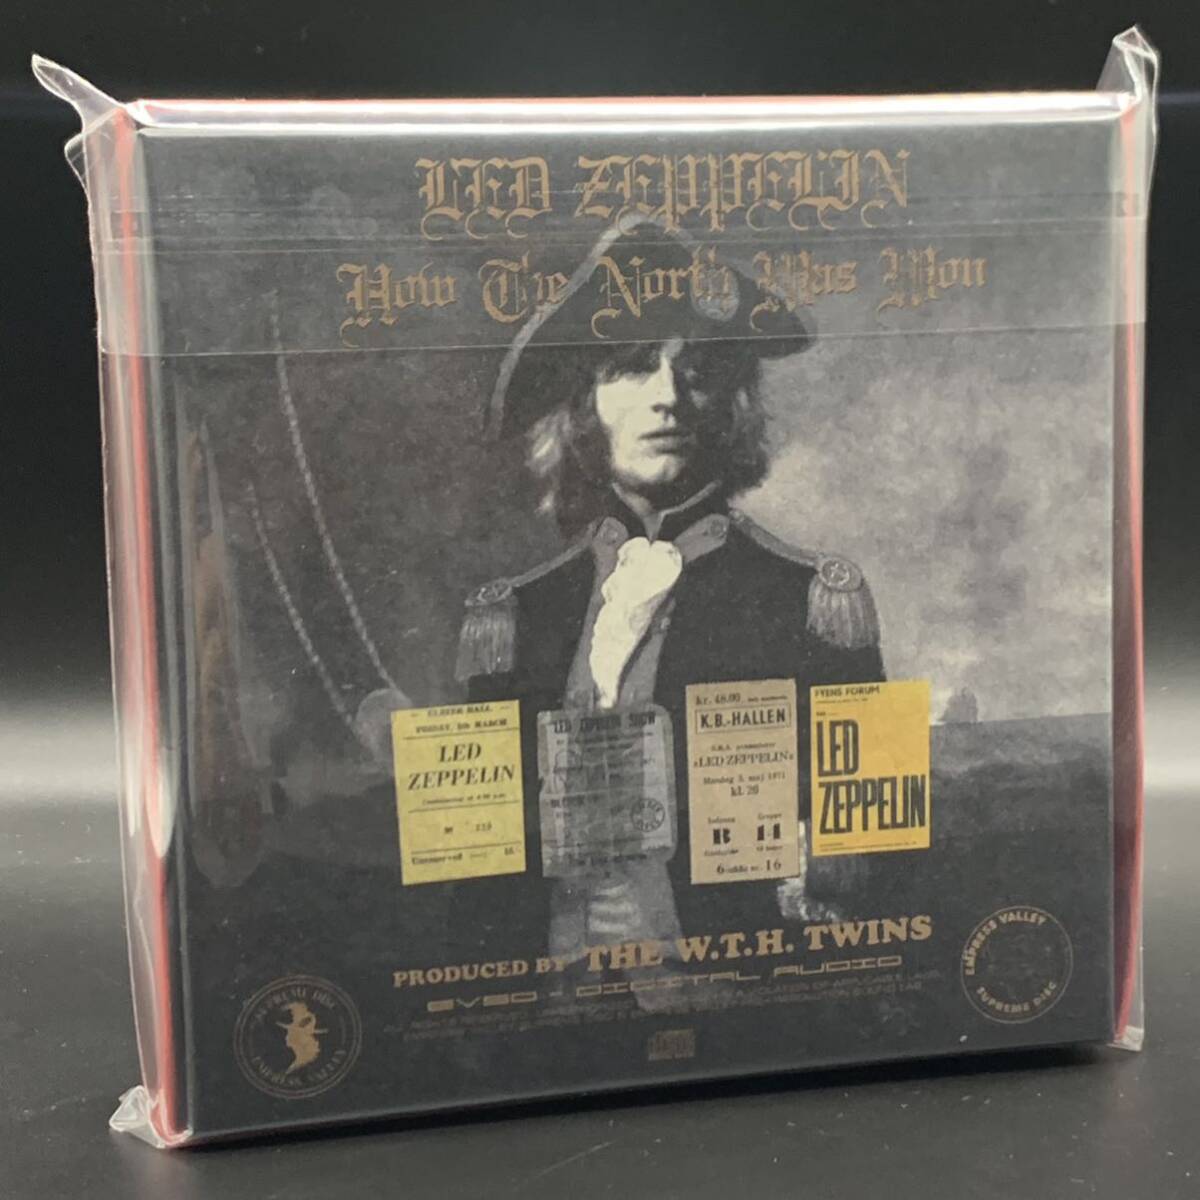 LED ZEPPELIN / HOW THE NORTH WAS WON「北部開拓史」(8CD BOX)の画像2